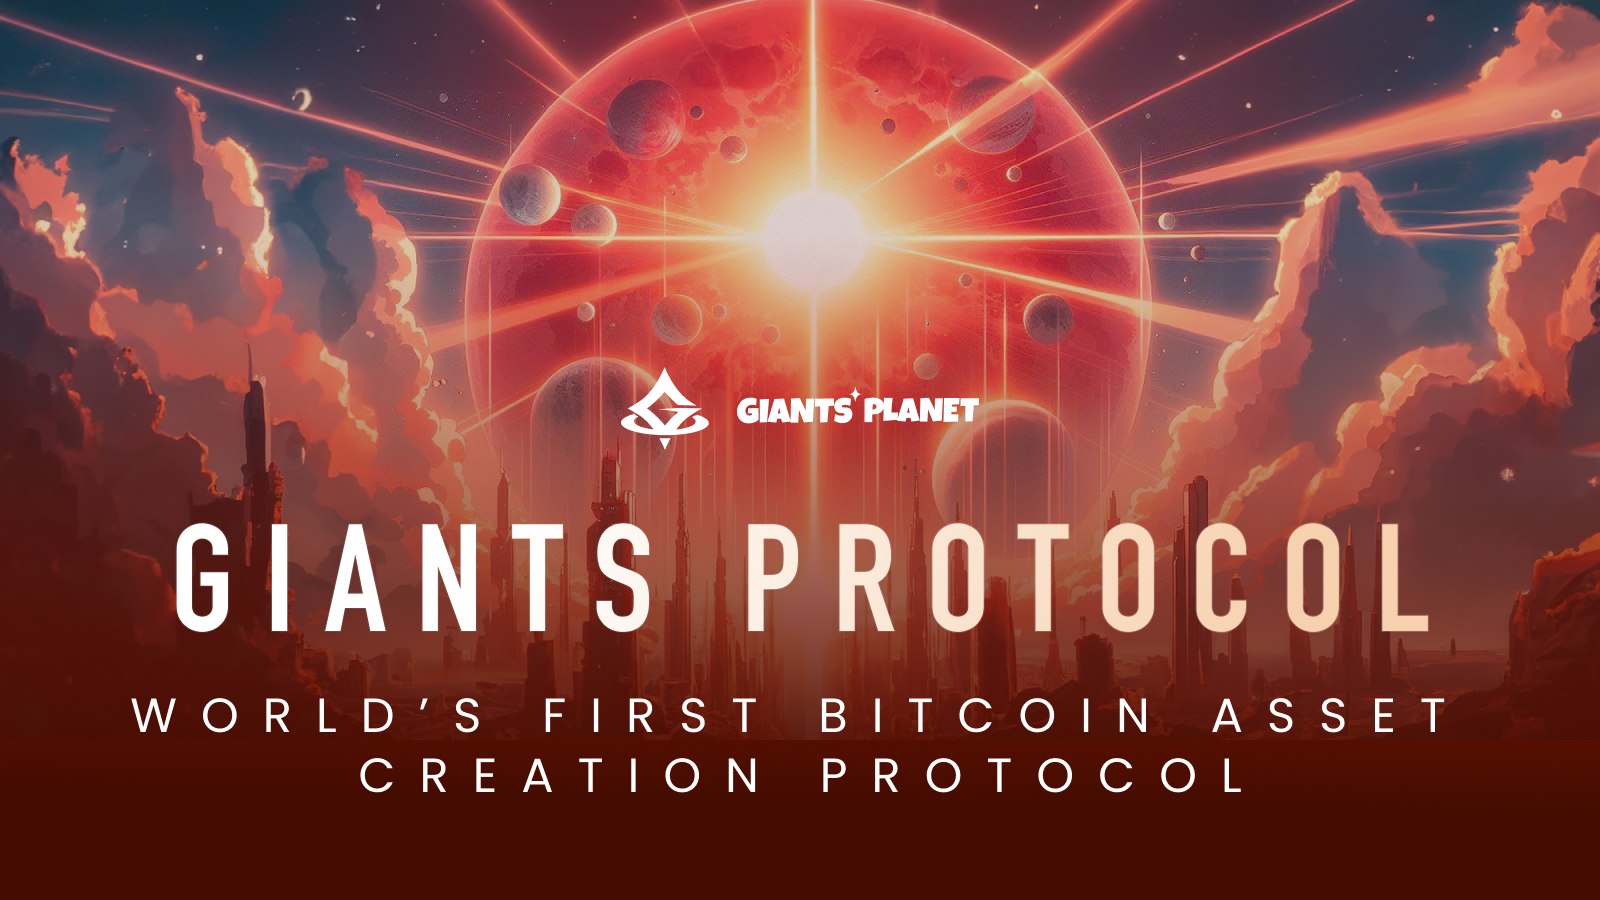 , Giants Protocol Brings Utility to Runes with First-Ever Bitcoin UTXO-Based Digital Asset Creation Platform